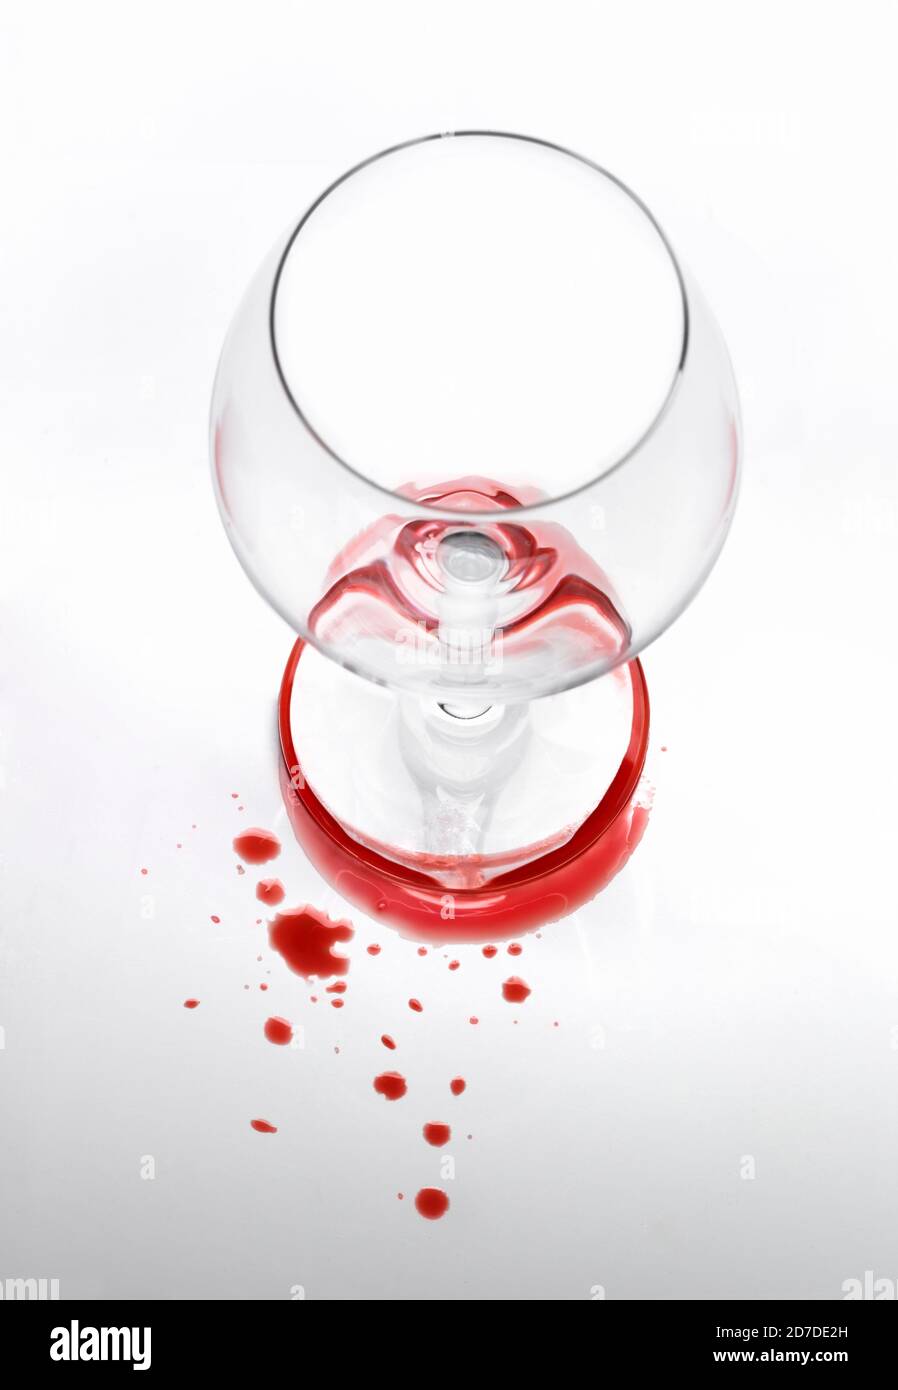 Shallow focus top view of empty glass of wine and wine stains Stock Photo